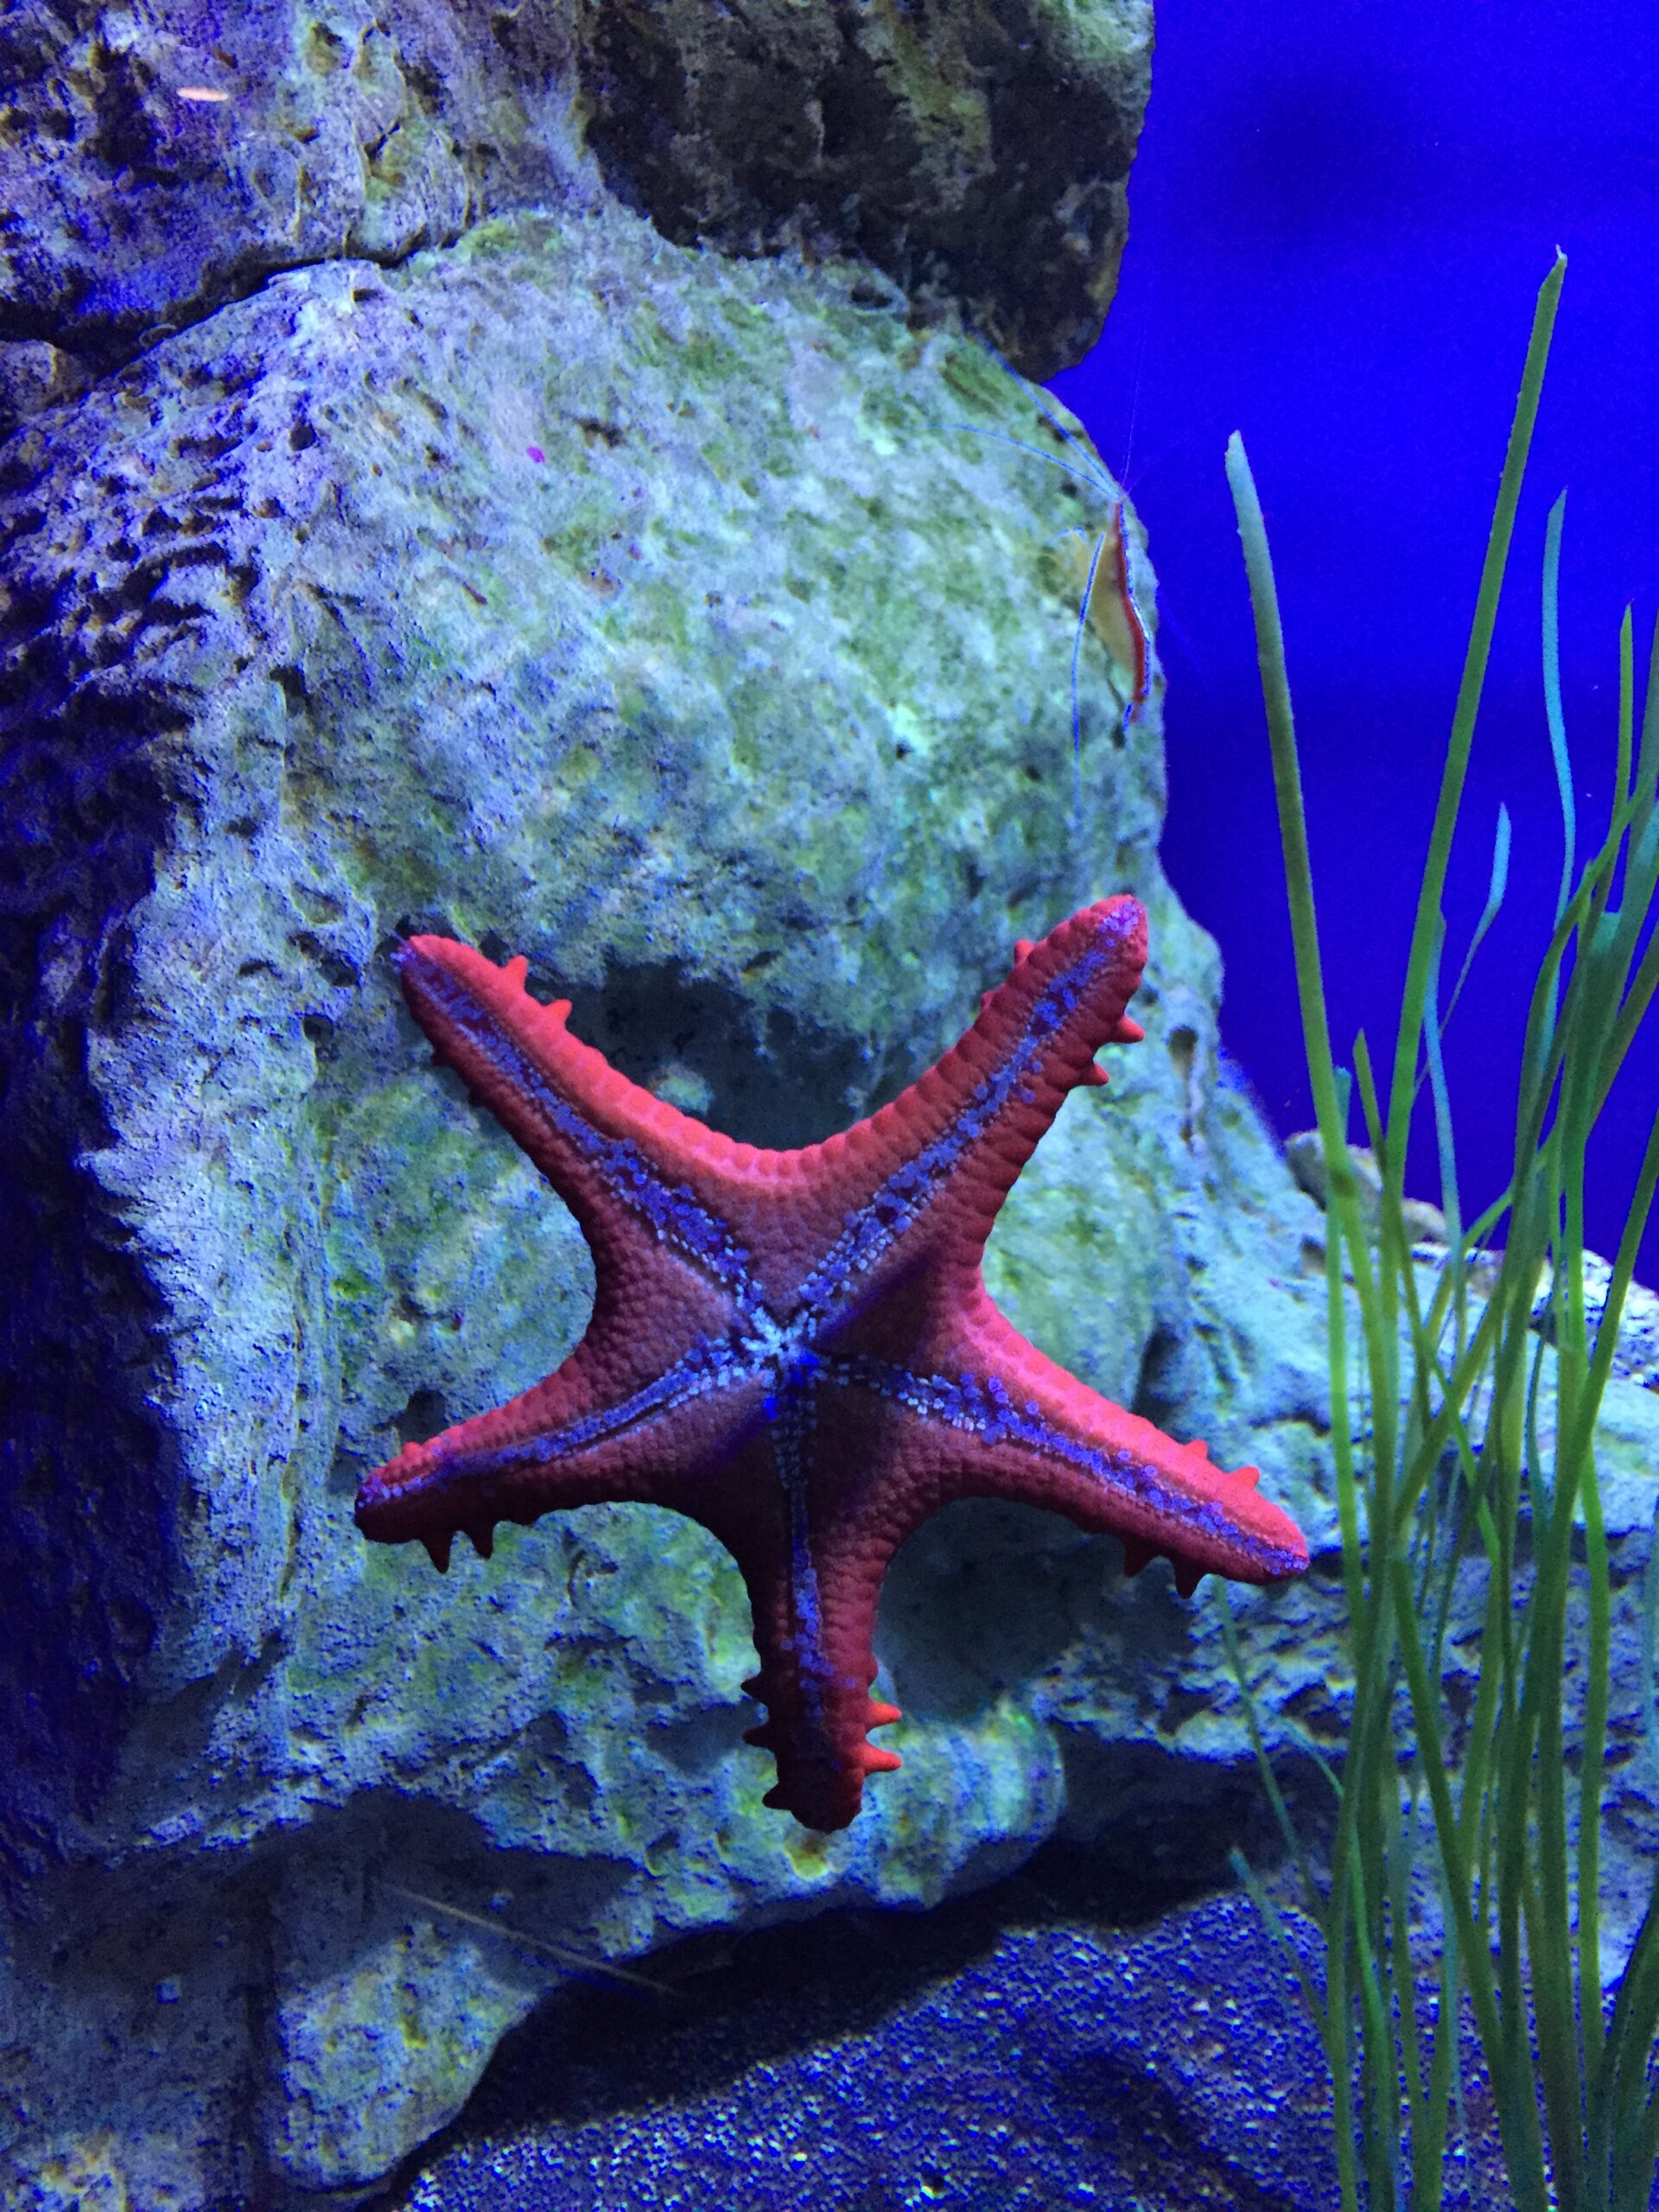 Starfish attached to the glass of an aquarium